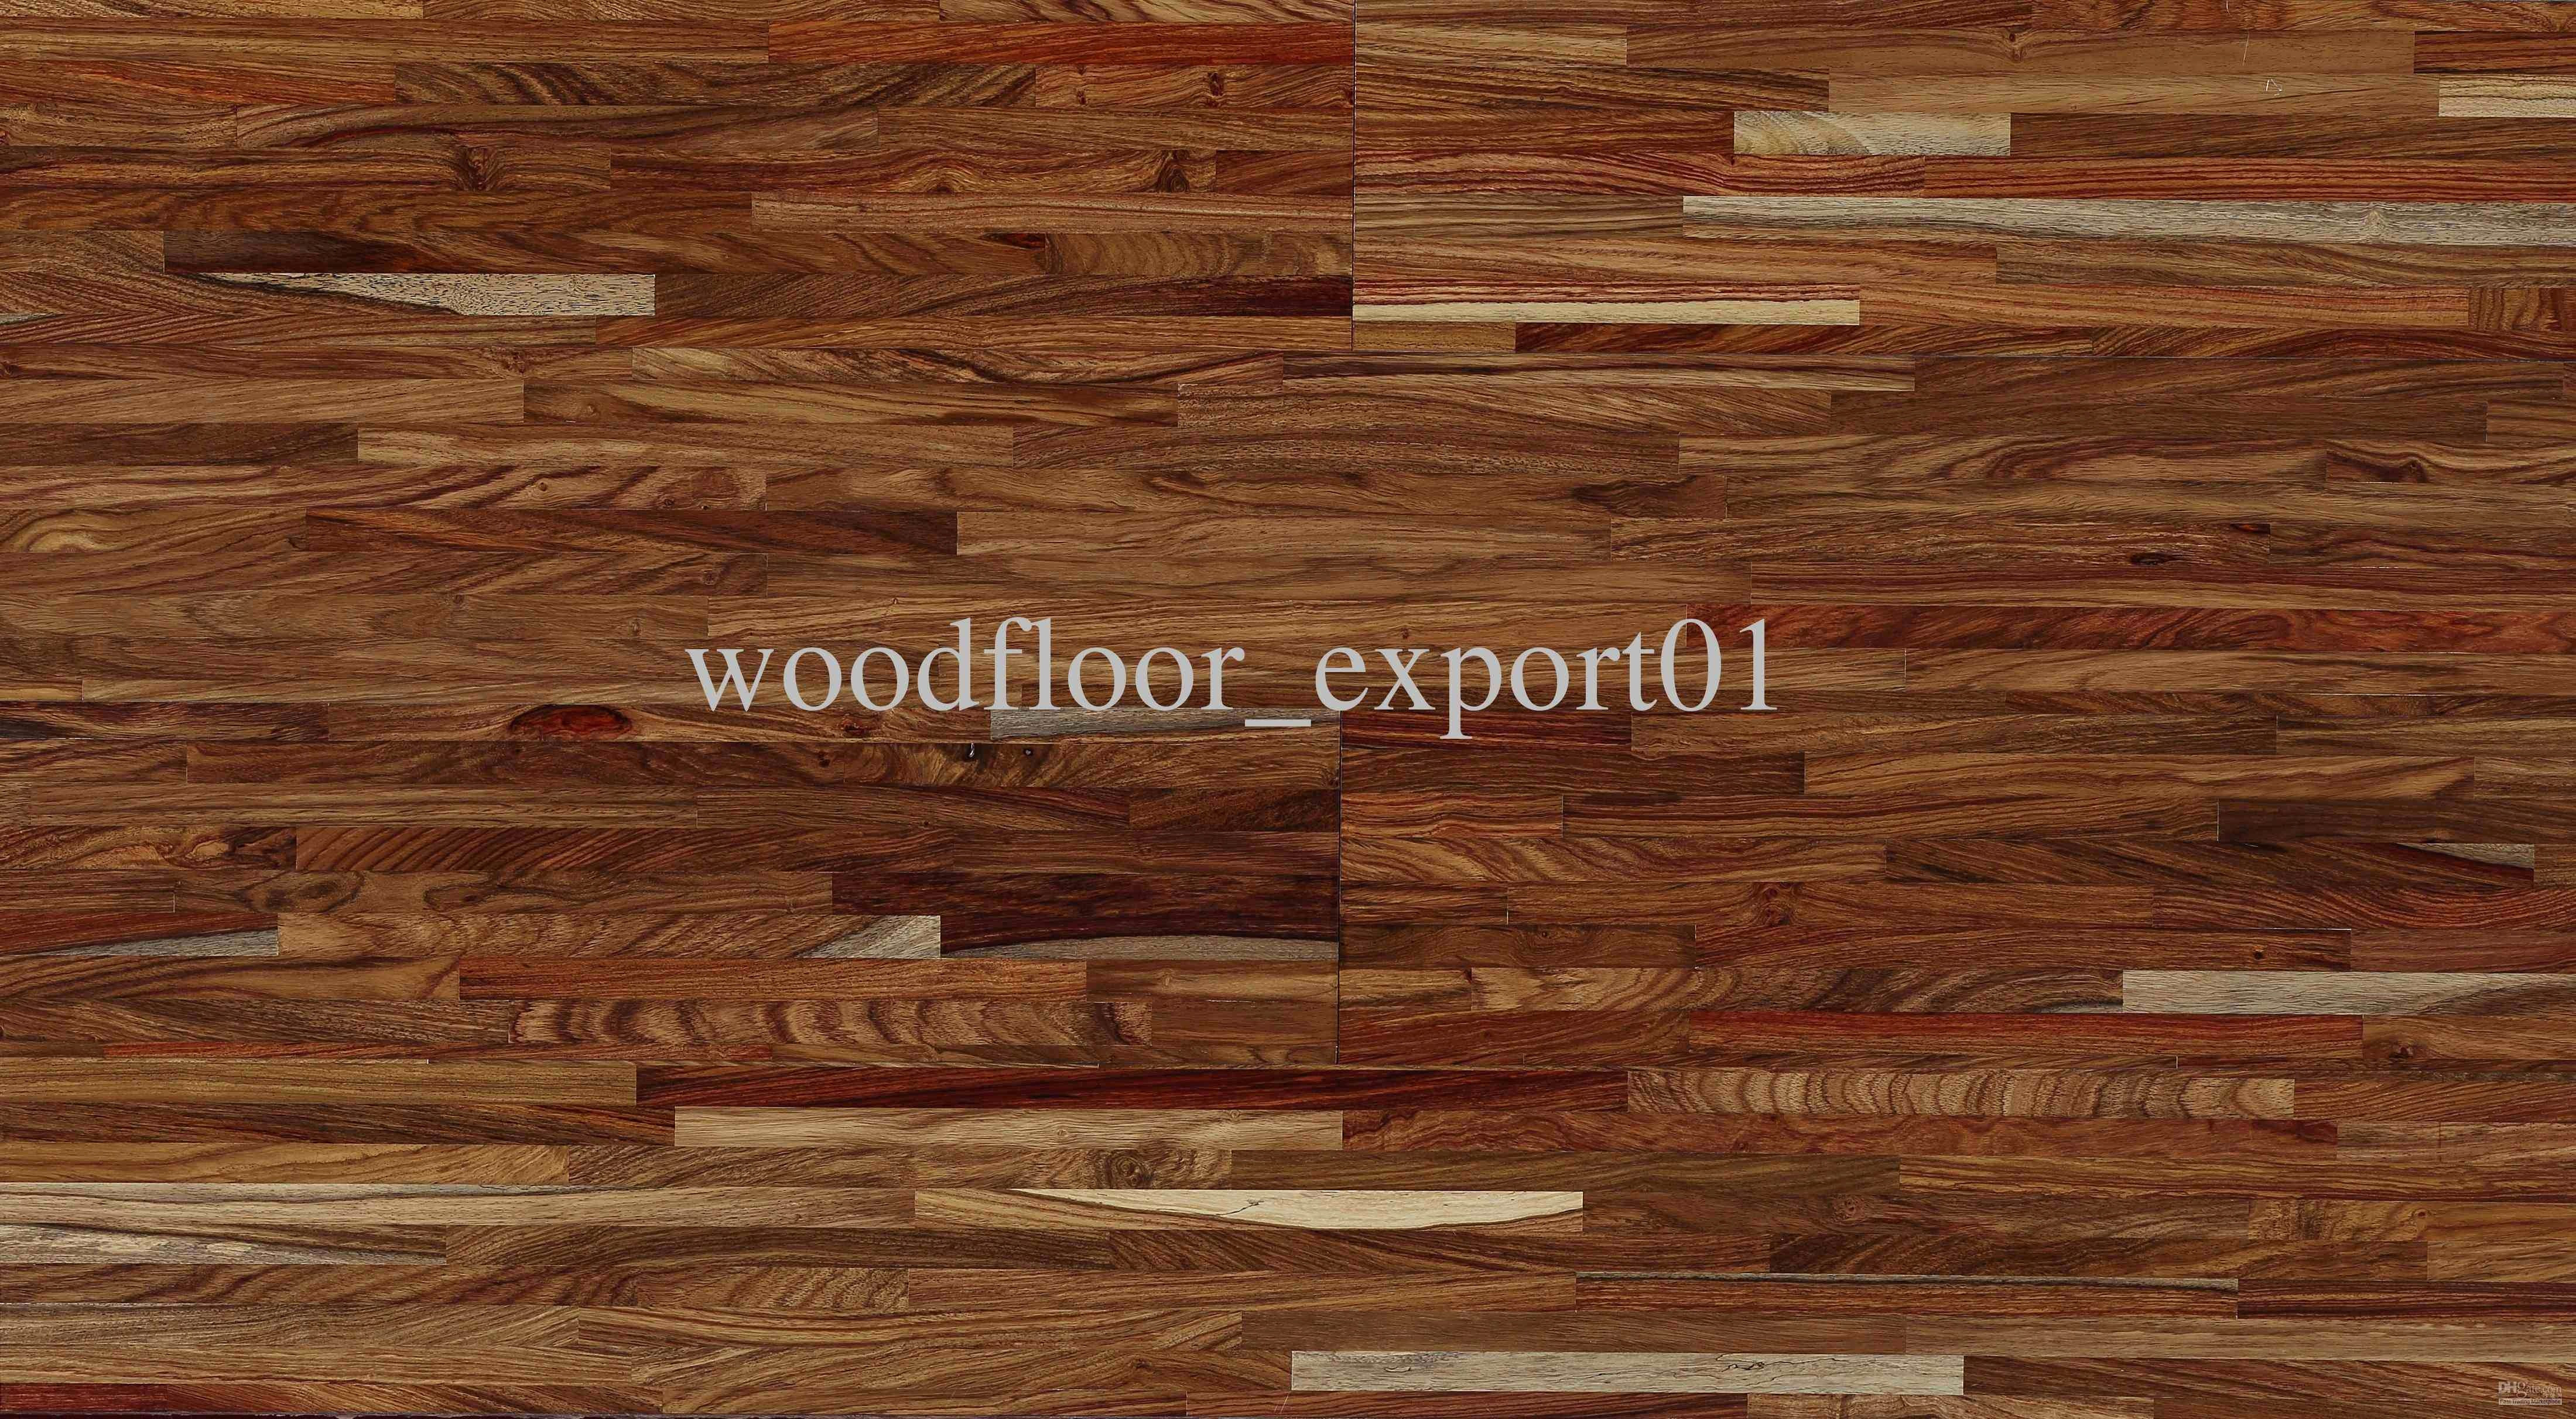 27 attractive How Difficult is It to Refinish Hardwood Floors 2023 free download how difficult is it to refinish hardwood floors of 15 unique types of hardwood flooring image dizpos com pertaining to types of hardwood flooring awesome 50 inspirational sanding and refinis